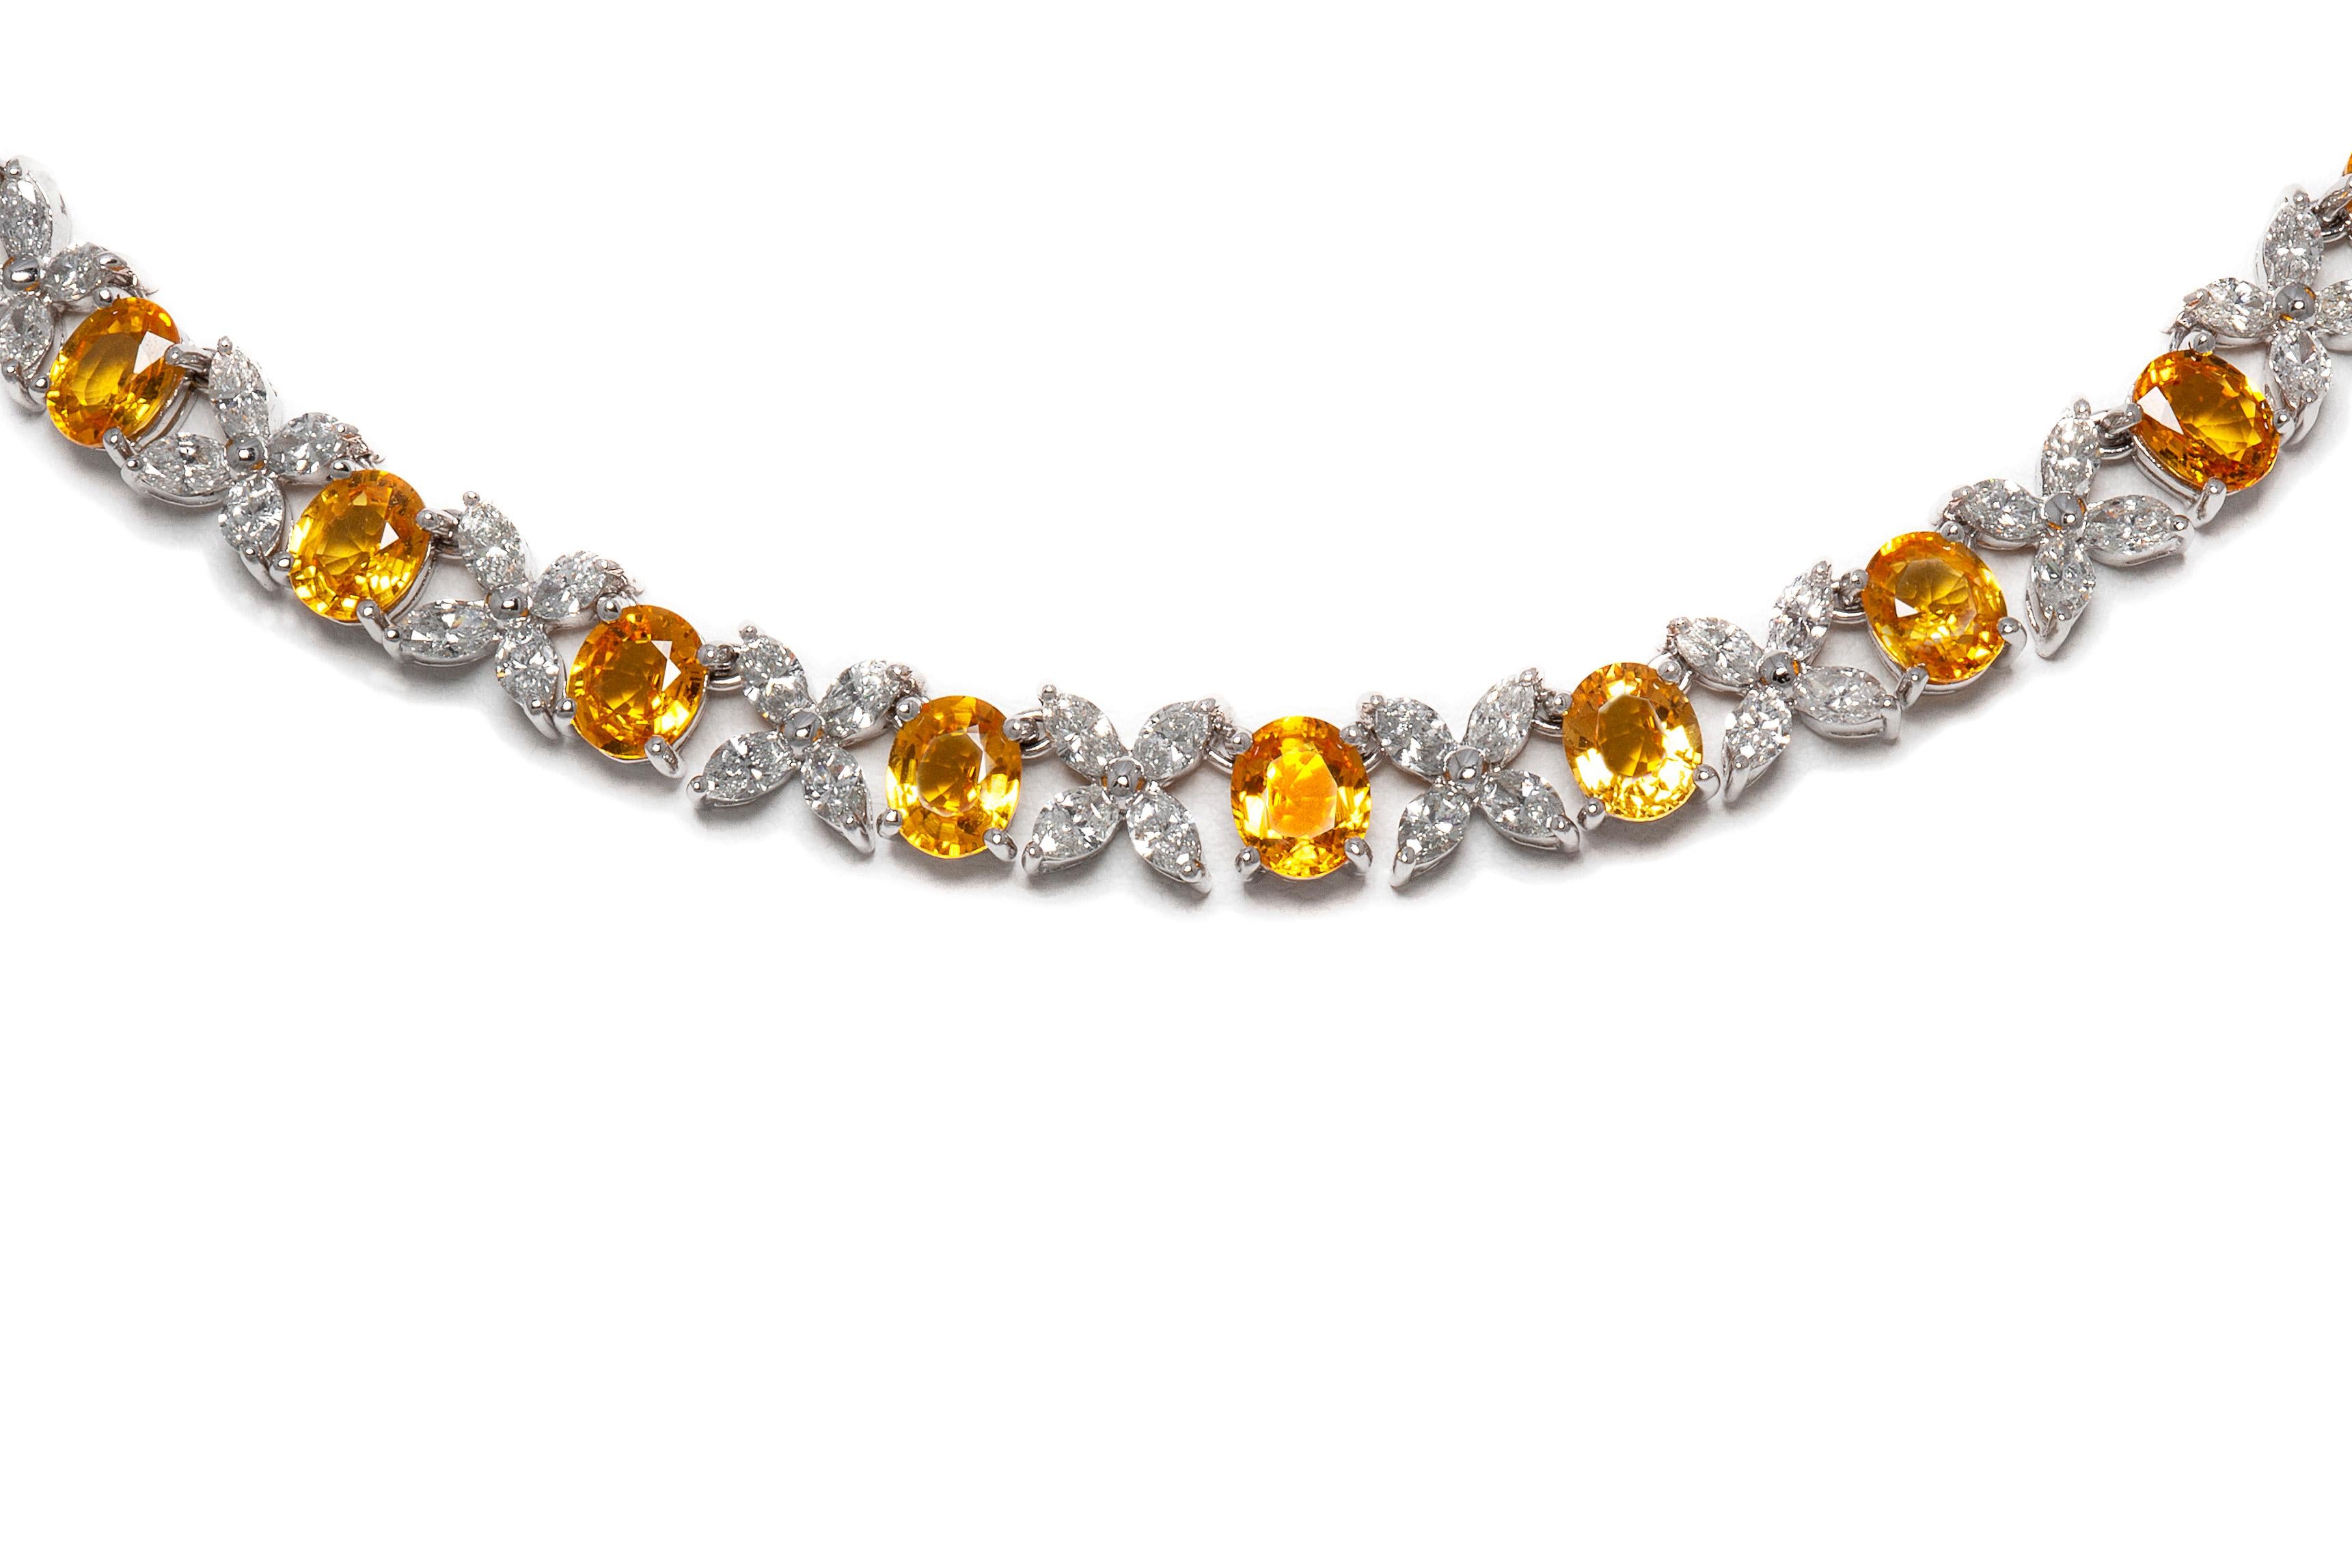 Necklace, finely crafted in 18k white gold with diamonds weighing a total of 10.81 carats and yellow sapphires weighing a total of 29.36 carats. Circa 2000.